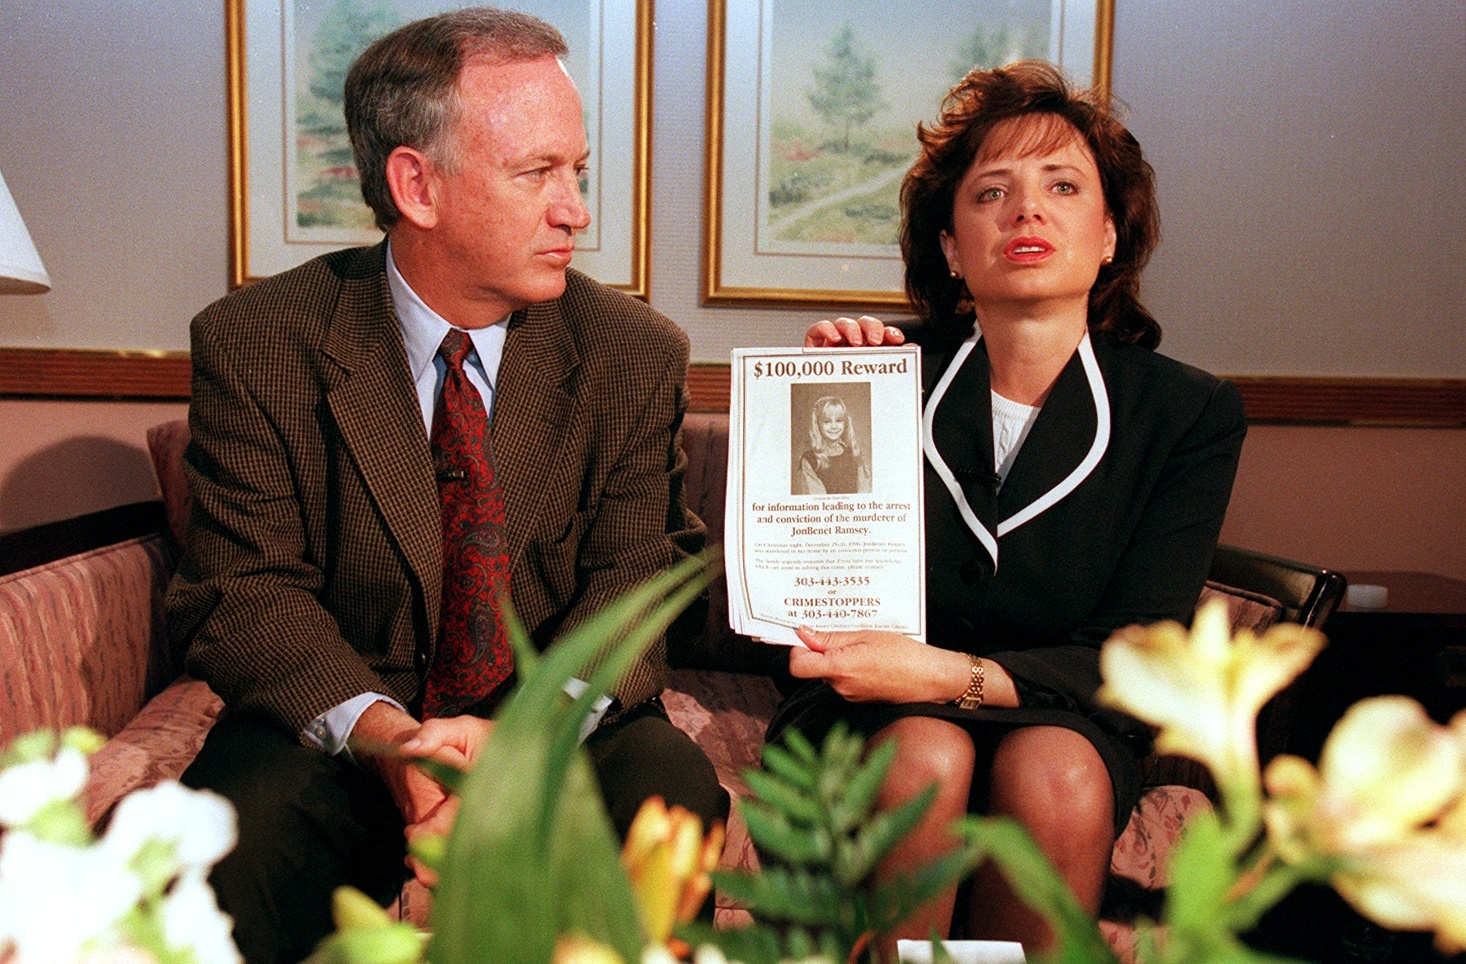 [IMAGE] How JonBenet Ramsey murder mystery could be ‘solved in a matter of hours’ thanks to DNA, expert reveals